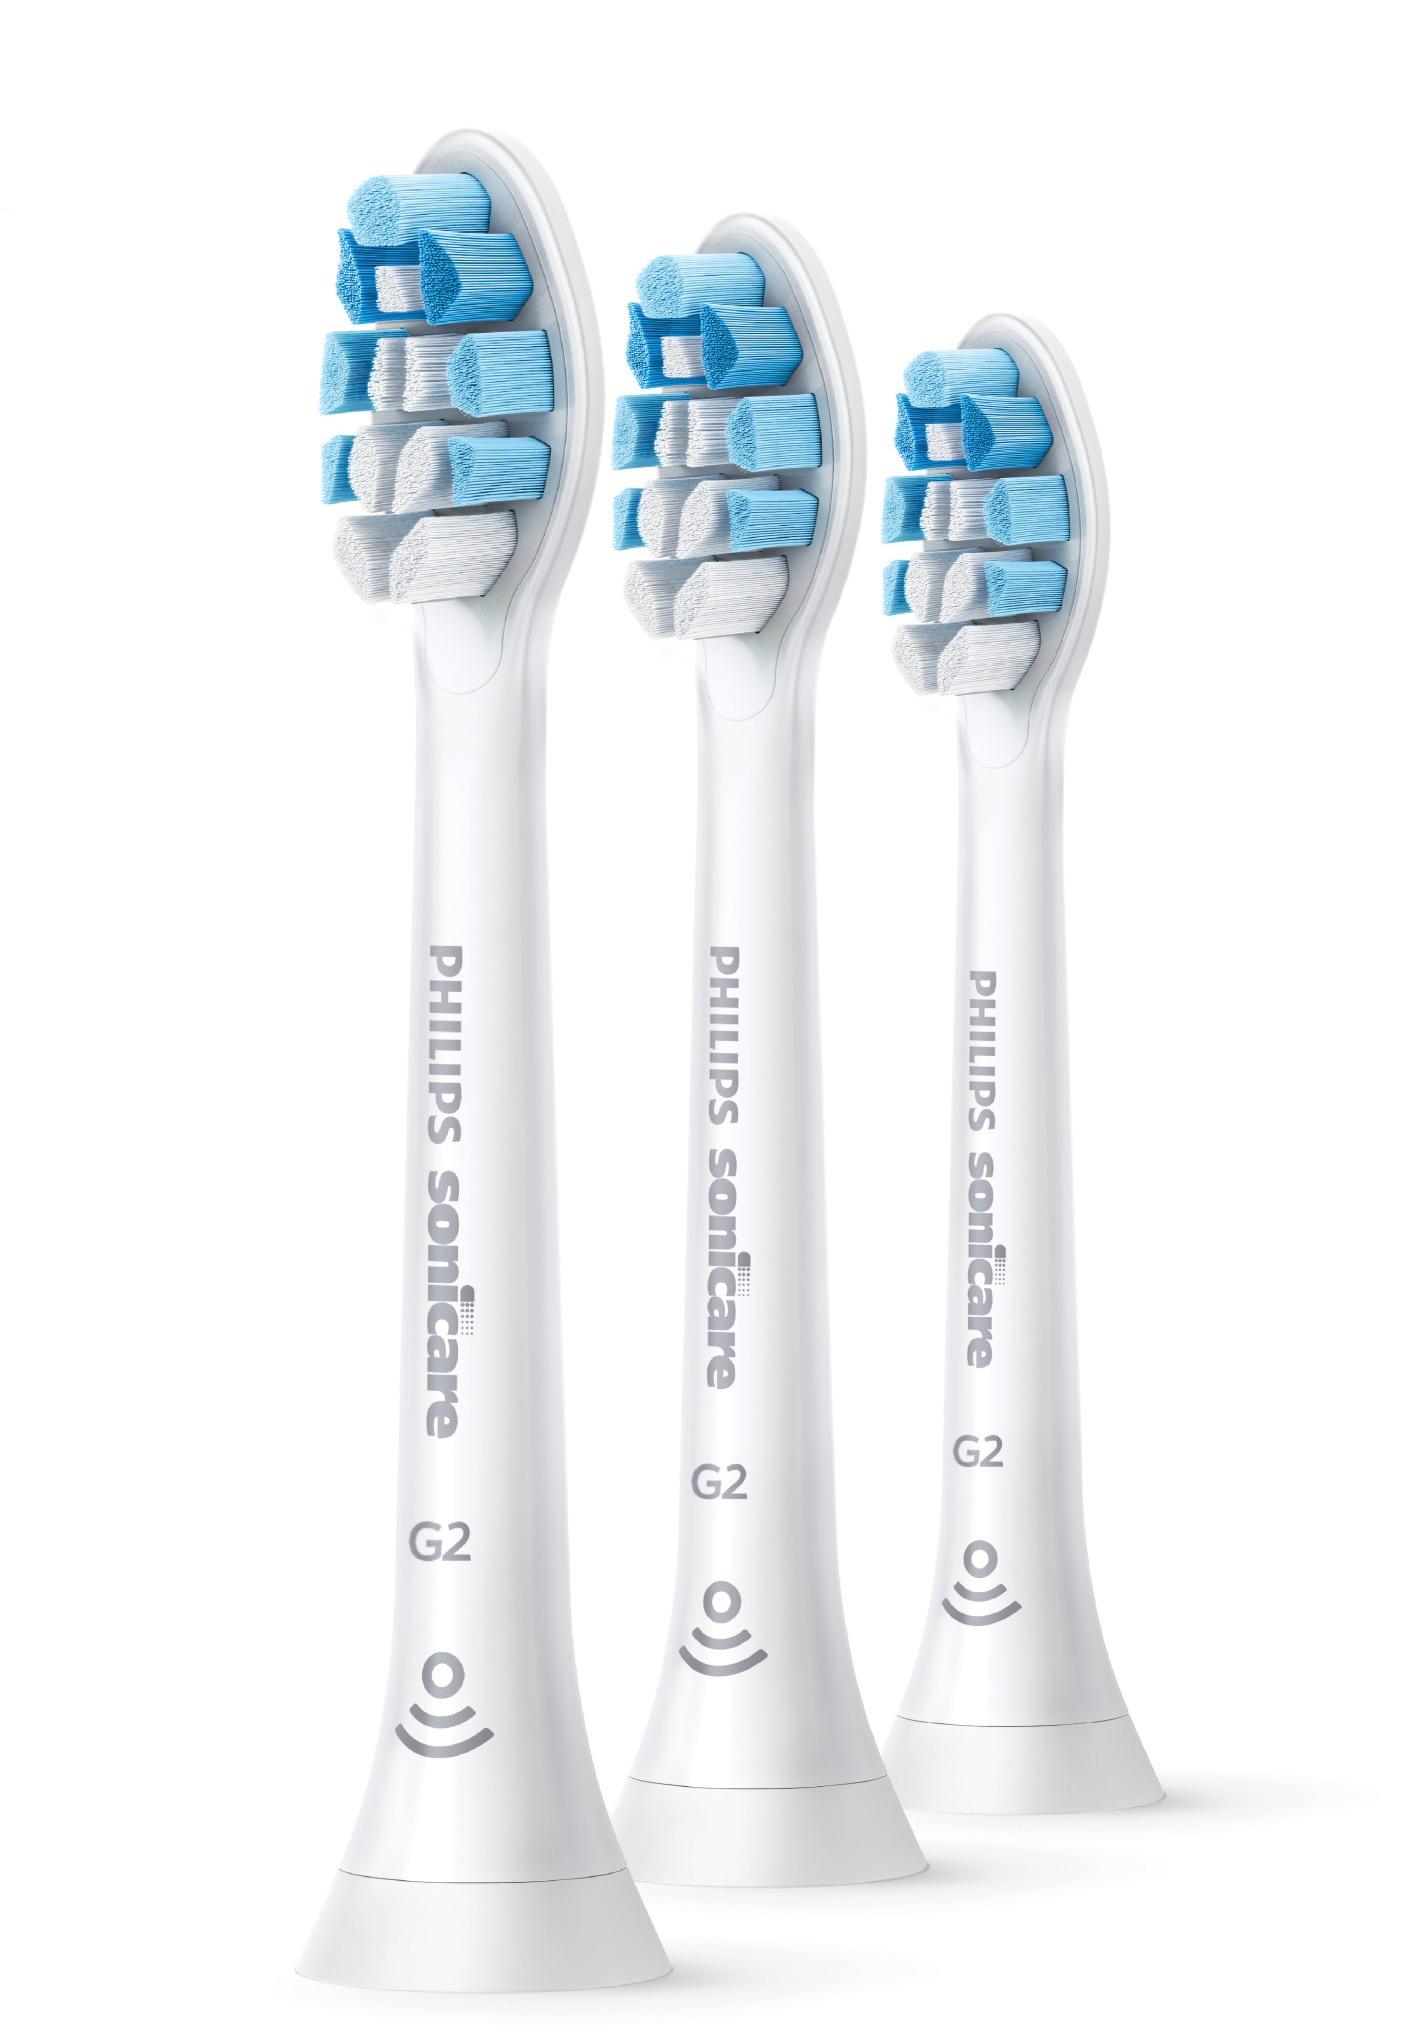 Angle View: Philips Sonicare - Optimal Plaque Control Replacement Toothbrush Heads (3-pack) - White